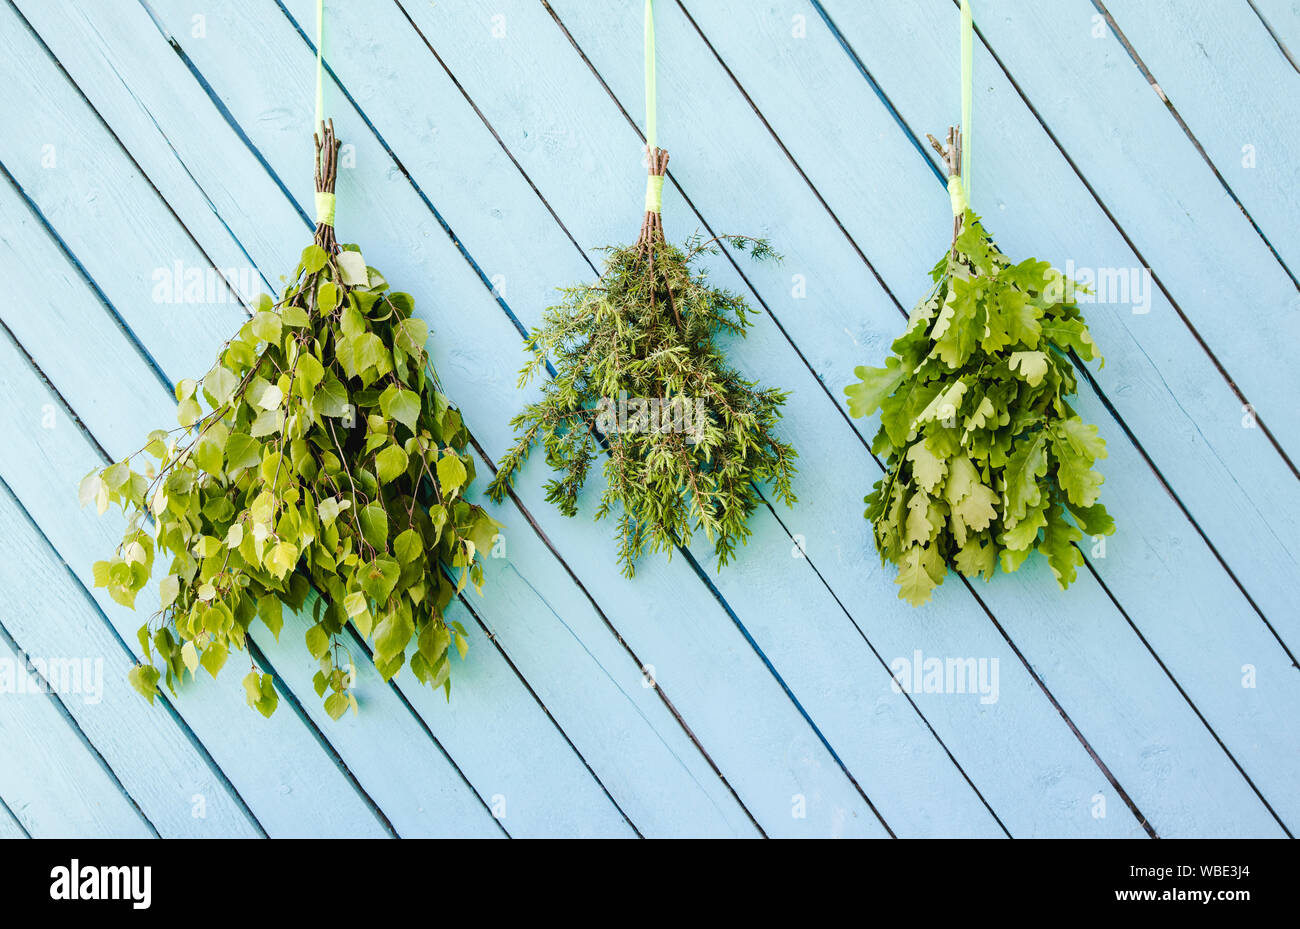 Different homemade fresh sauna whisks branches hanging and drying on blue wall. Birch, oak and juniper broom bundles. Stock Photo